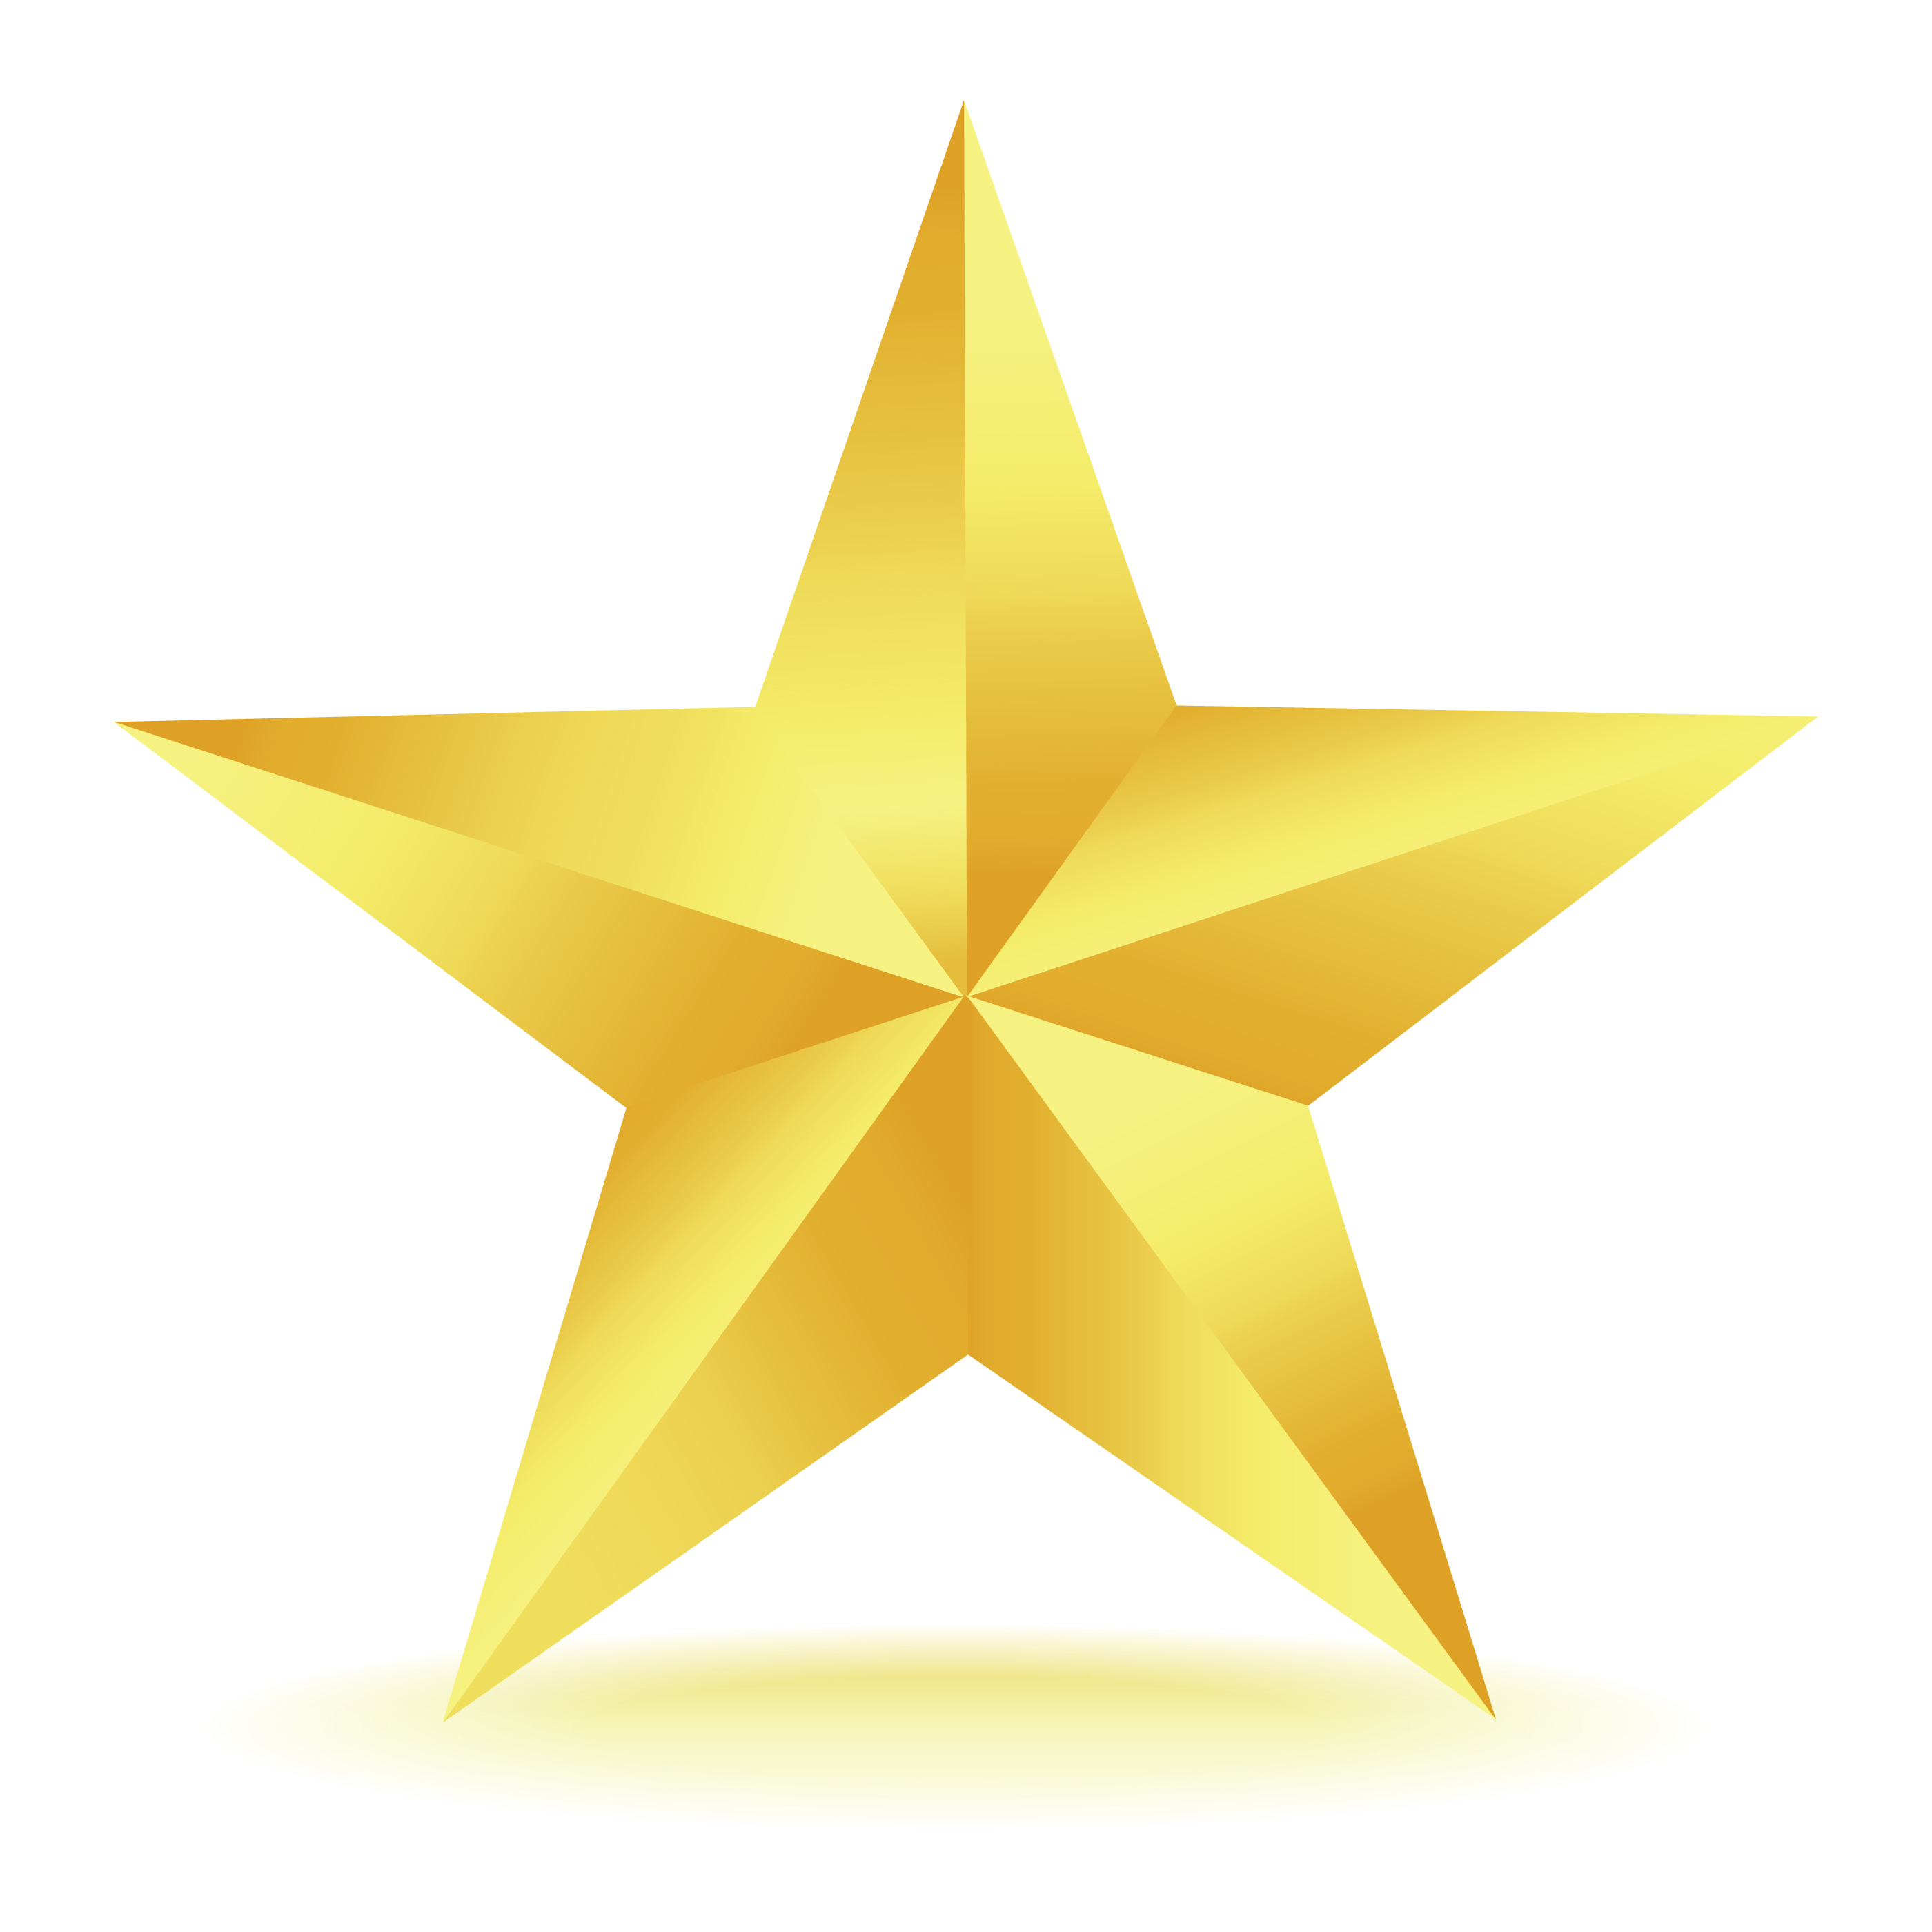 Gold Star Clipart No Background   Clipart Panda   Free Clipart Images